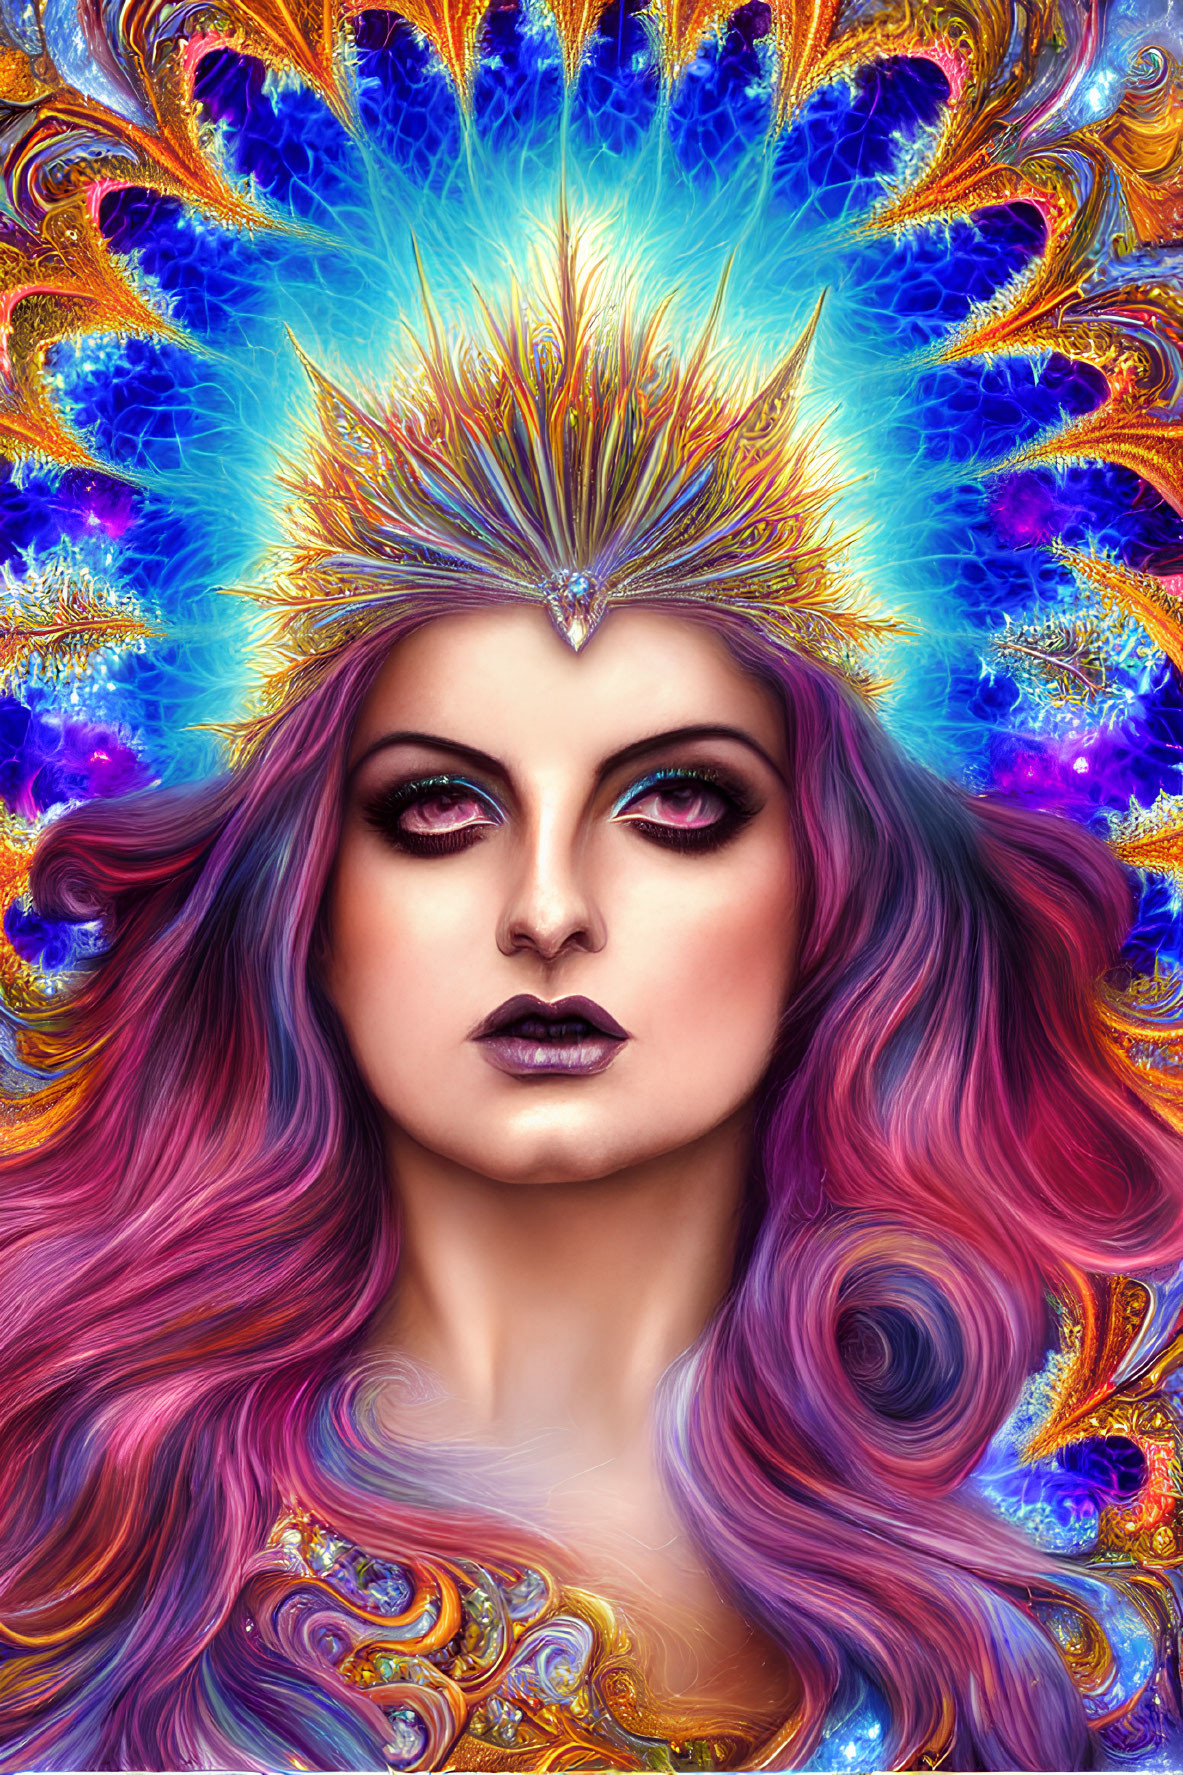 Colorful fantasy illustration of a woman with ornate crown and purple hair